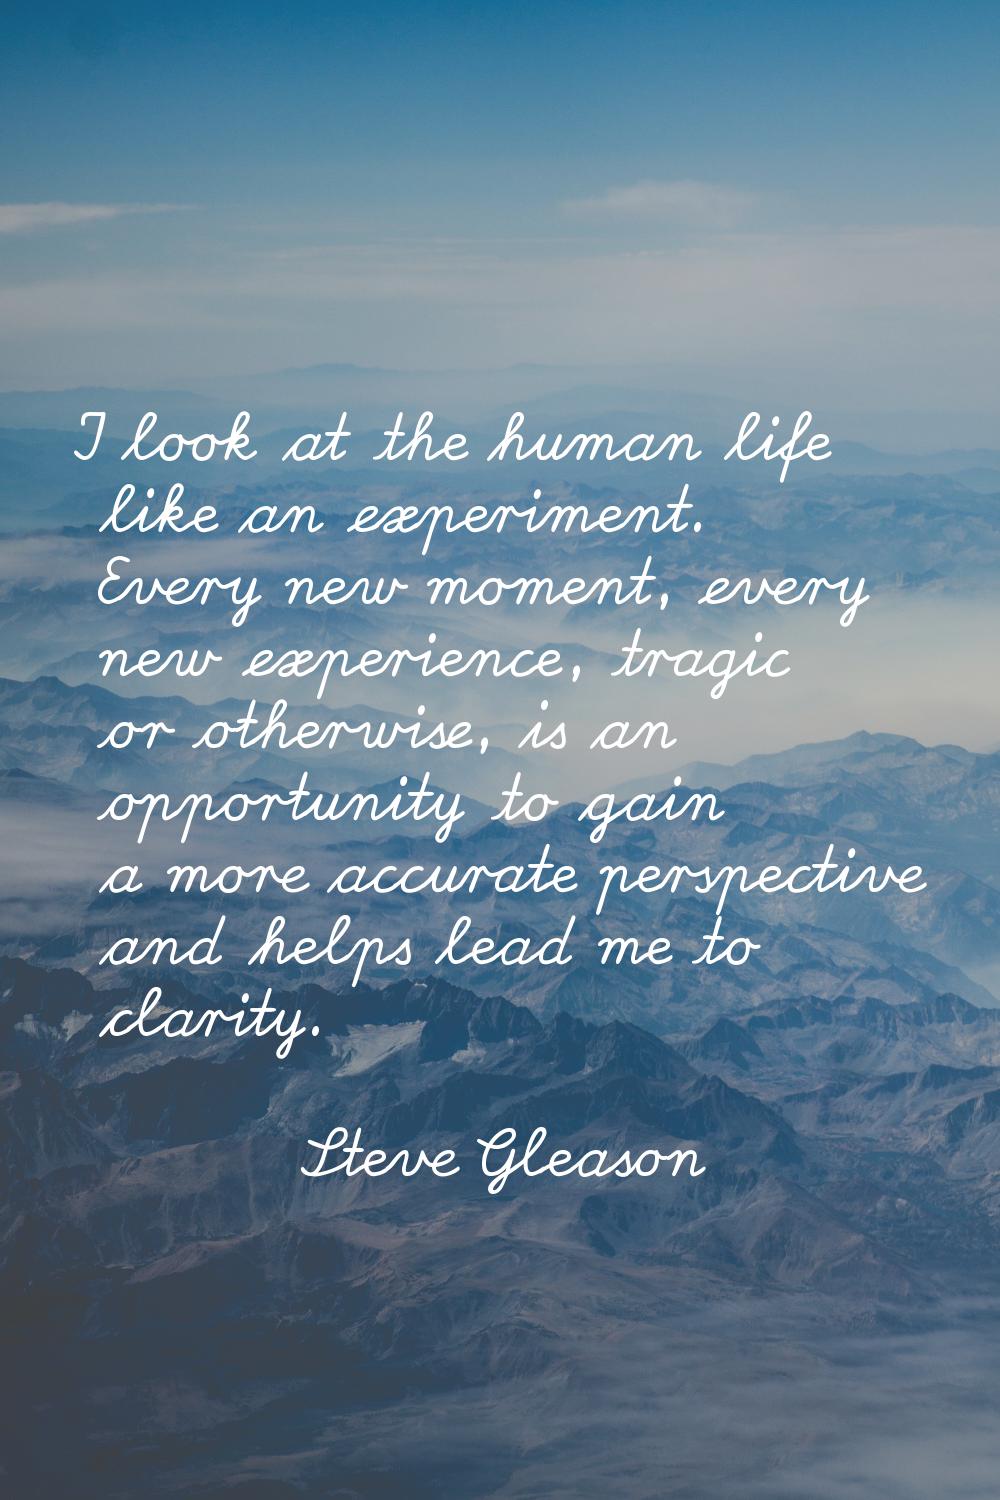 I look at the human life like an experiment. Every new moment, every new experience, tragic or othe